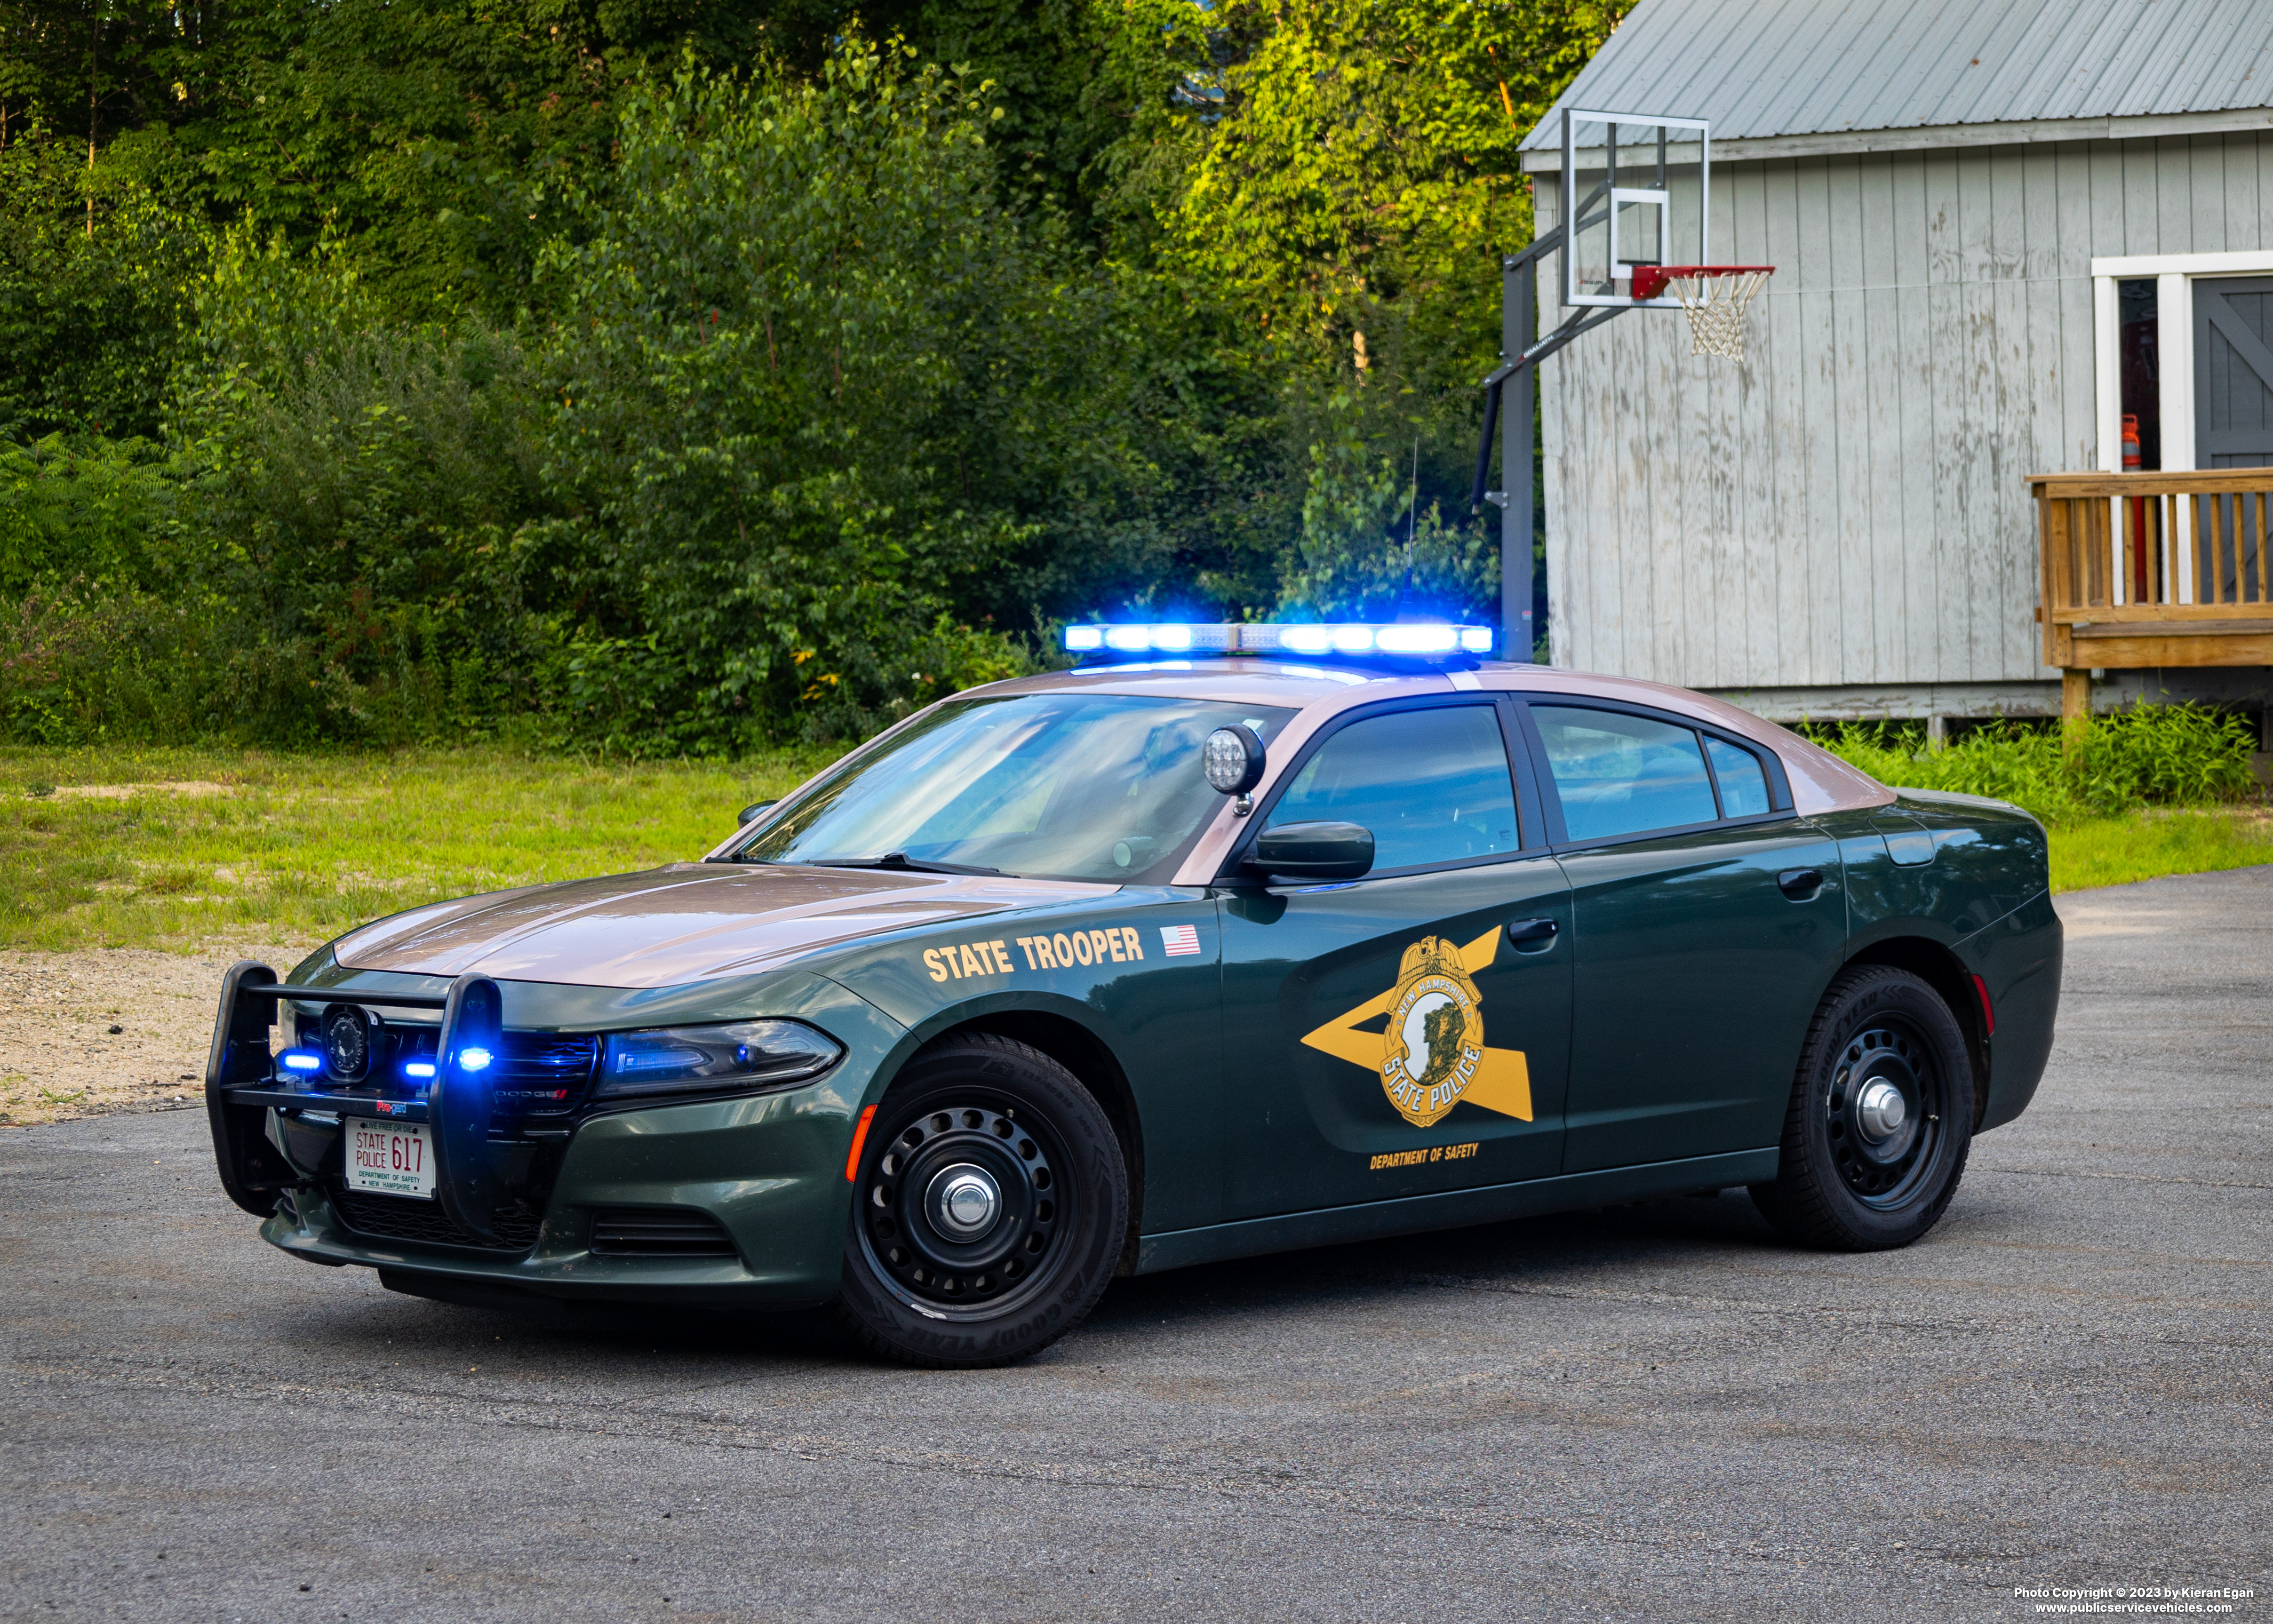 A photo  of New Hampshire State Police
            Cruiser 617, a 2017 Dodge Charger             taken by Kieran Egan